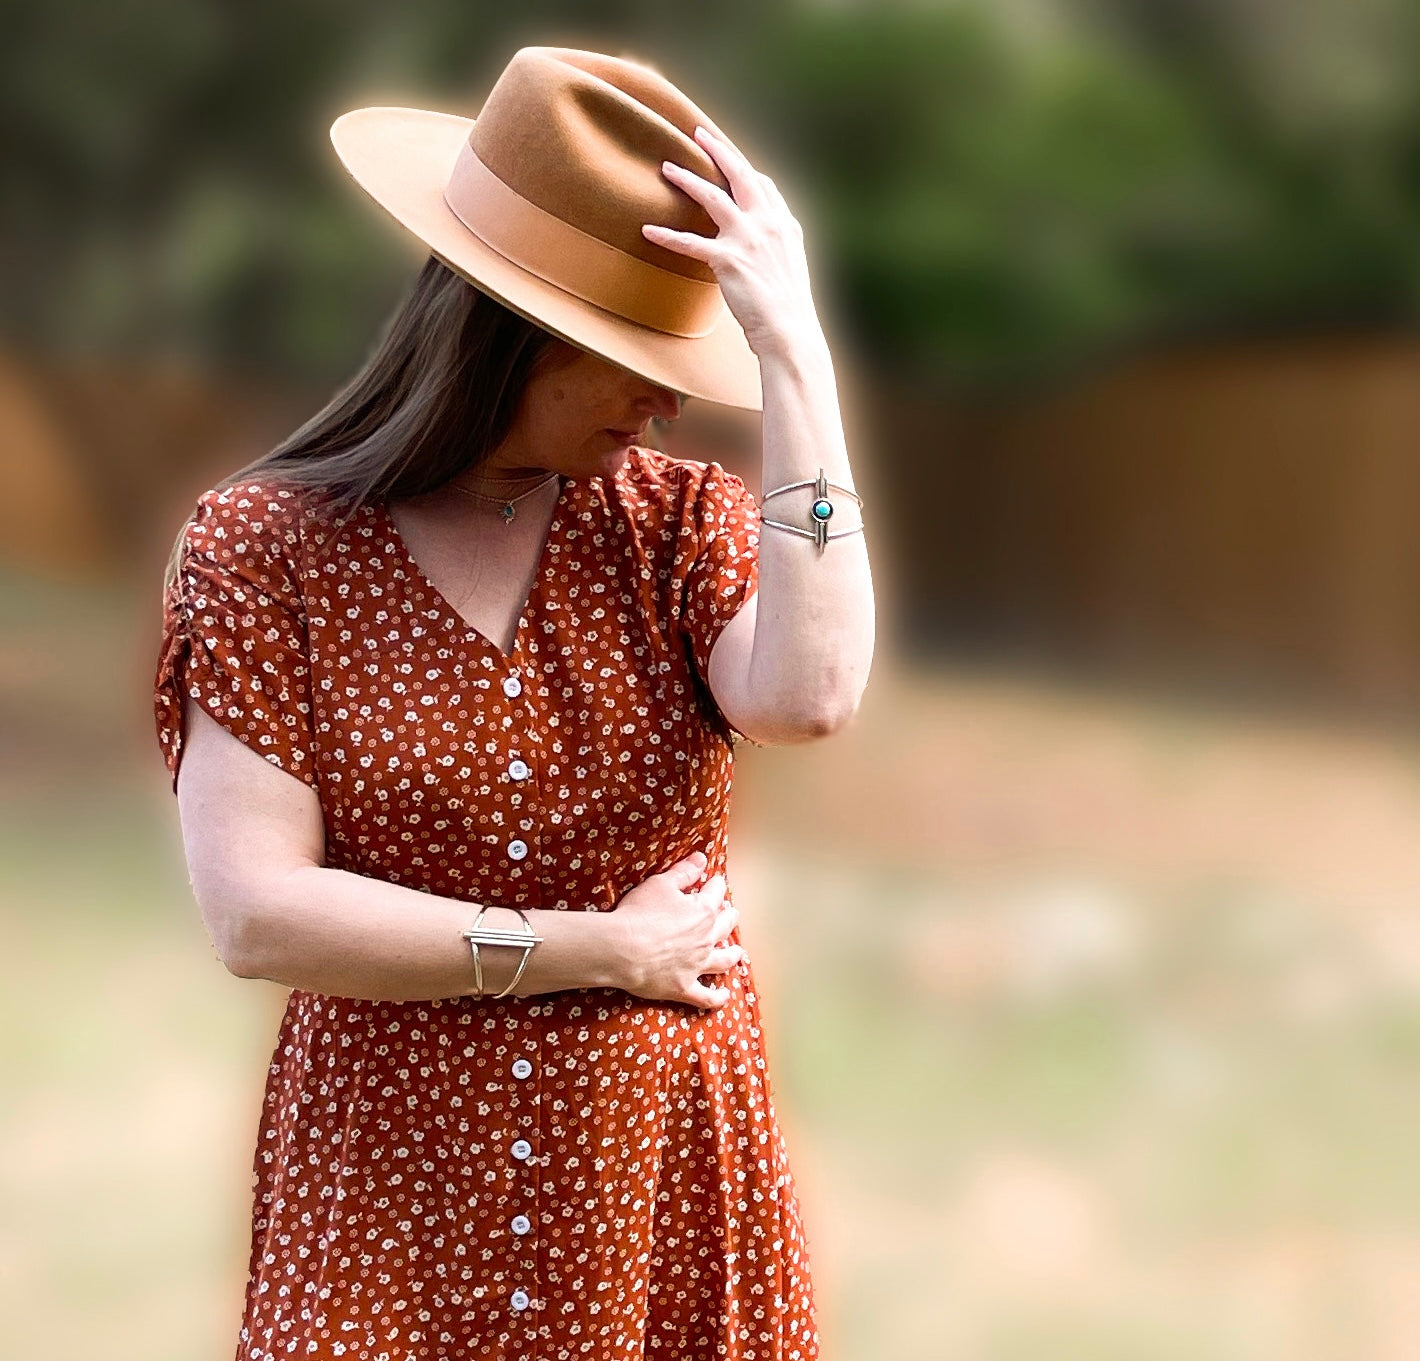 Woman wearing a brown dress with white flowers wearing Art Deco inspired sterling silver cuff bracelets on each wrist outdoors. She is wearing a brown western style hat with her head bent down to one side. One hand is touching the top of the hat and her other hand is across her waist to show the cuff designs.